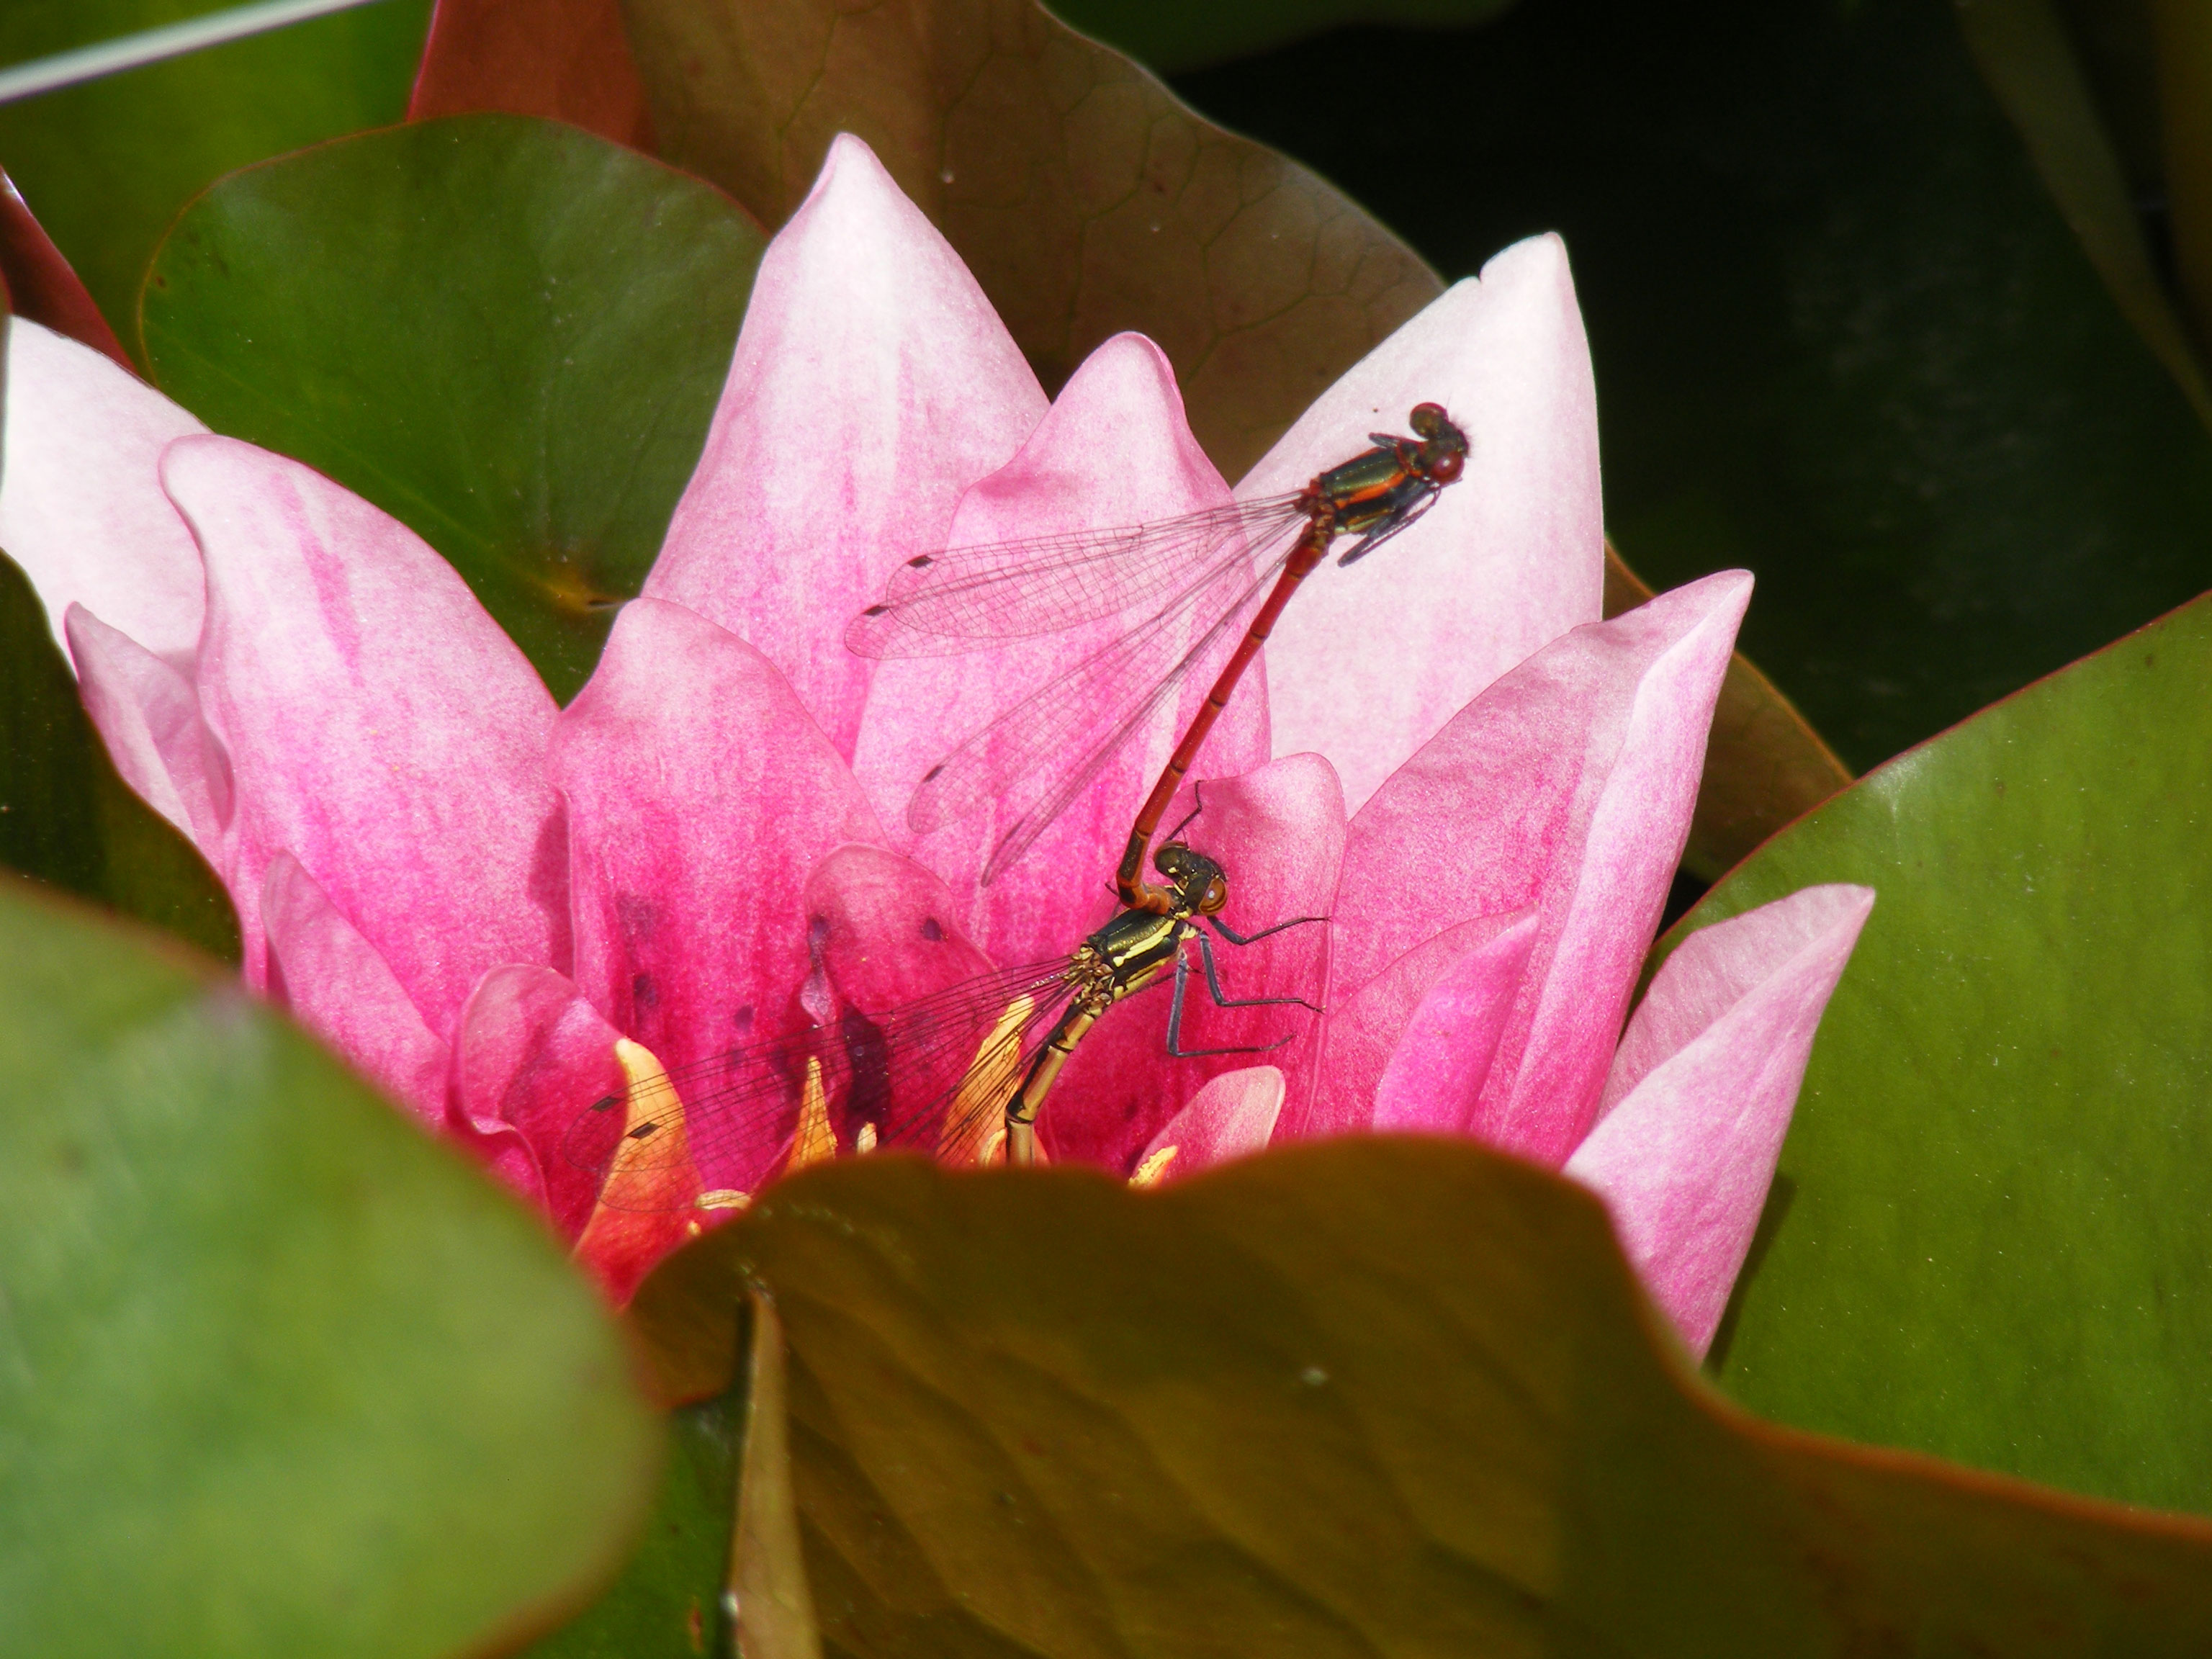 Damselfly dalliance caught on camera, beautifully framed by the soft pink petals of the water lily.